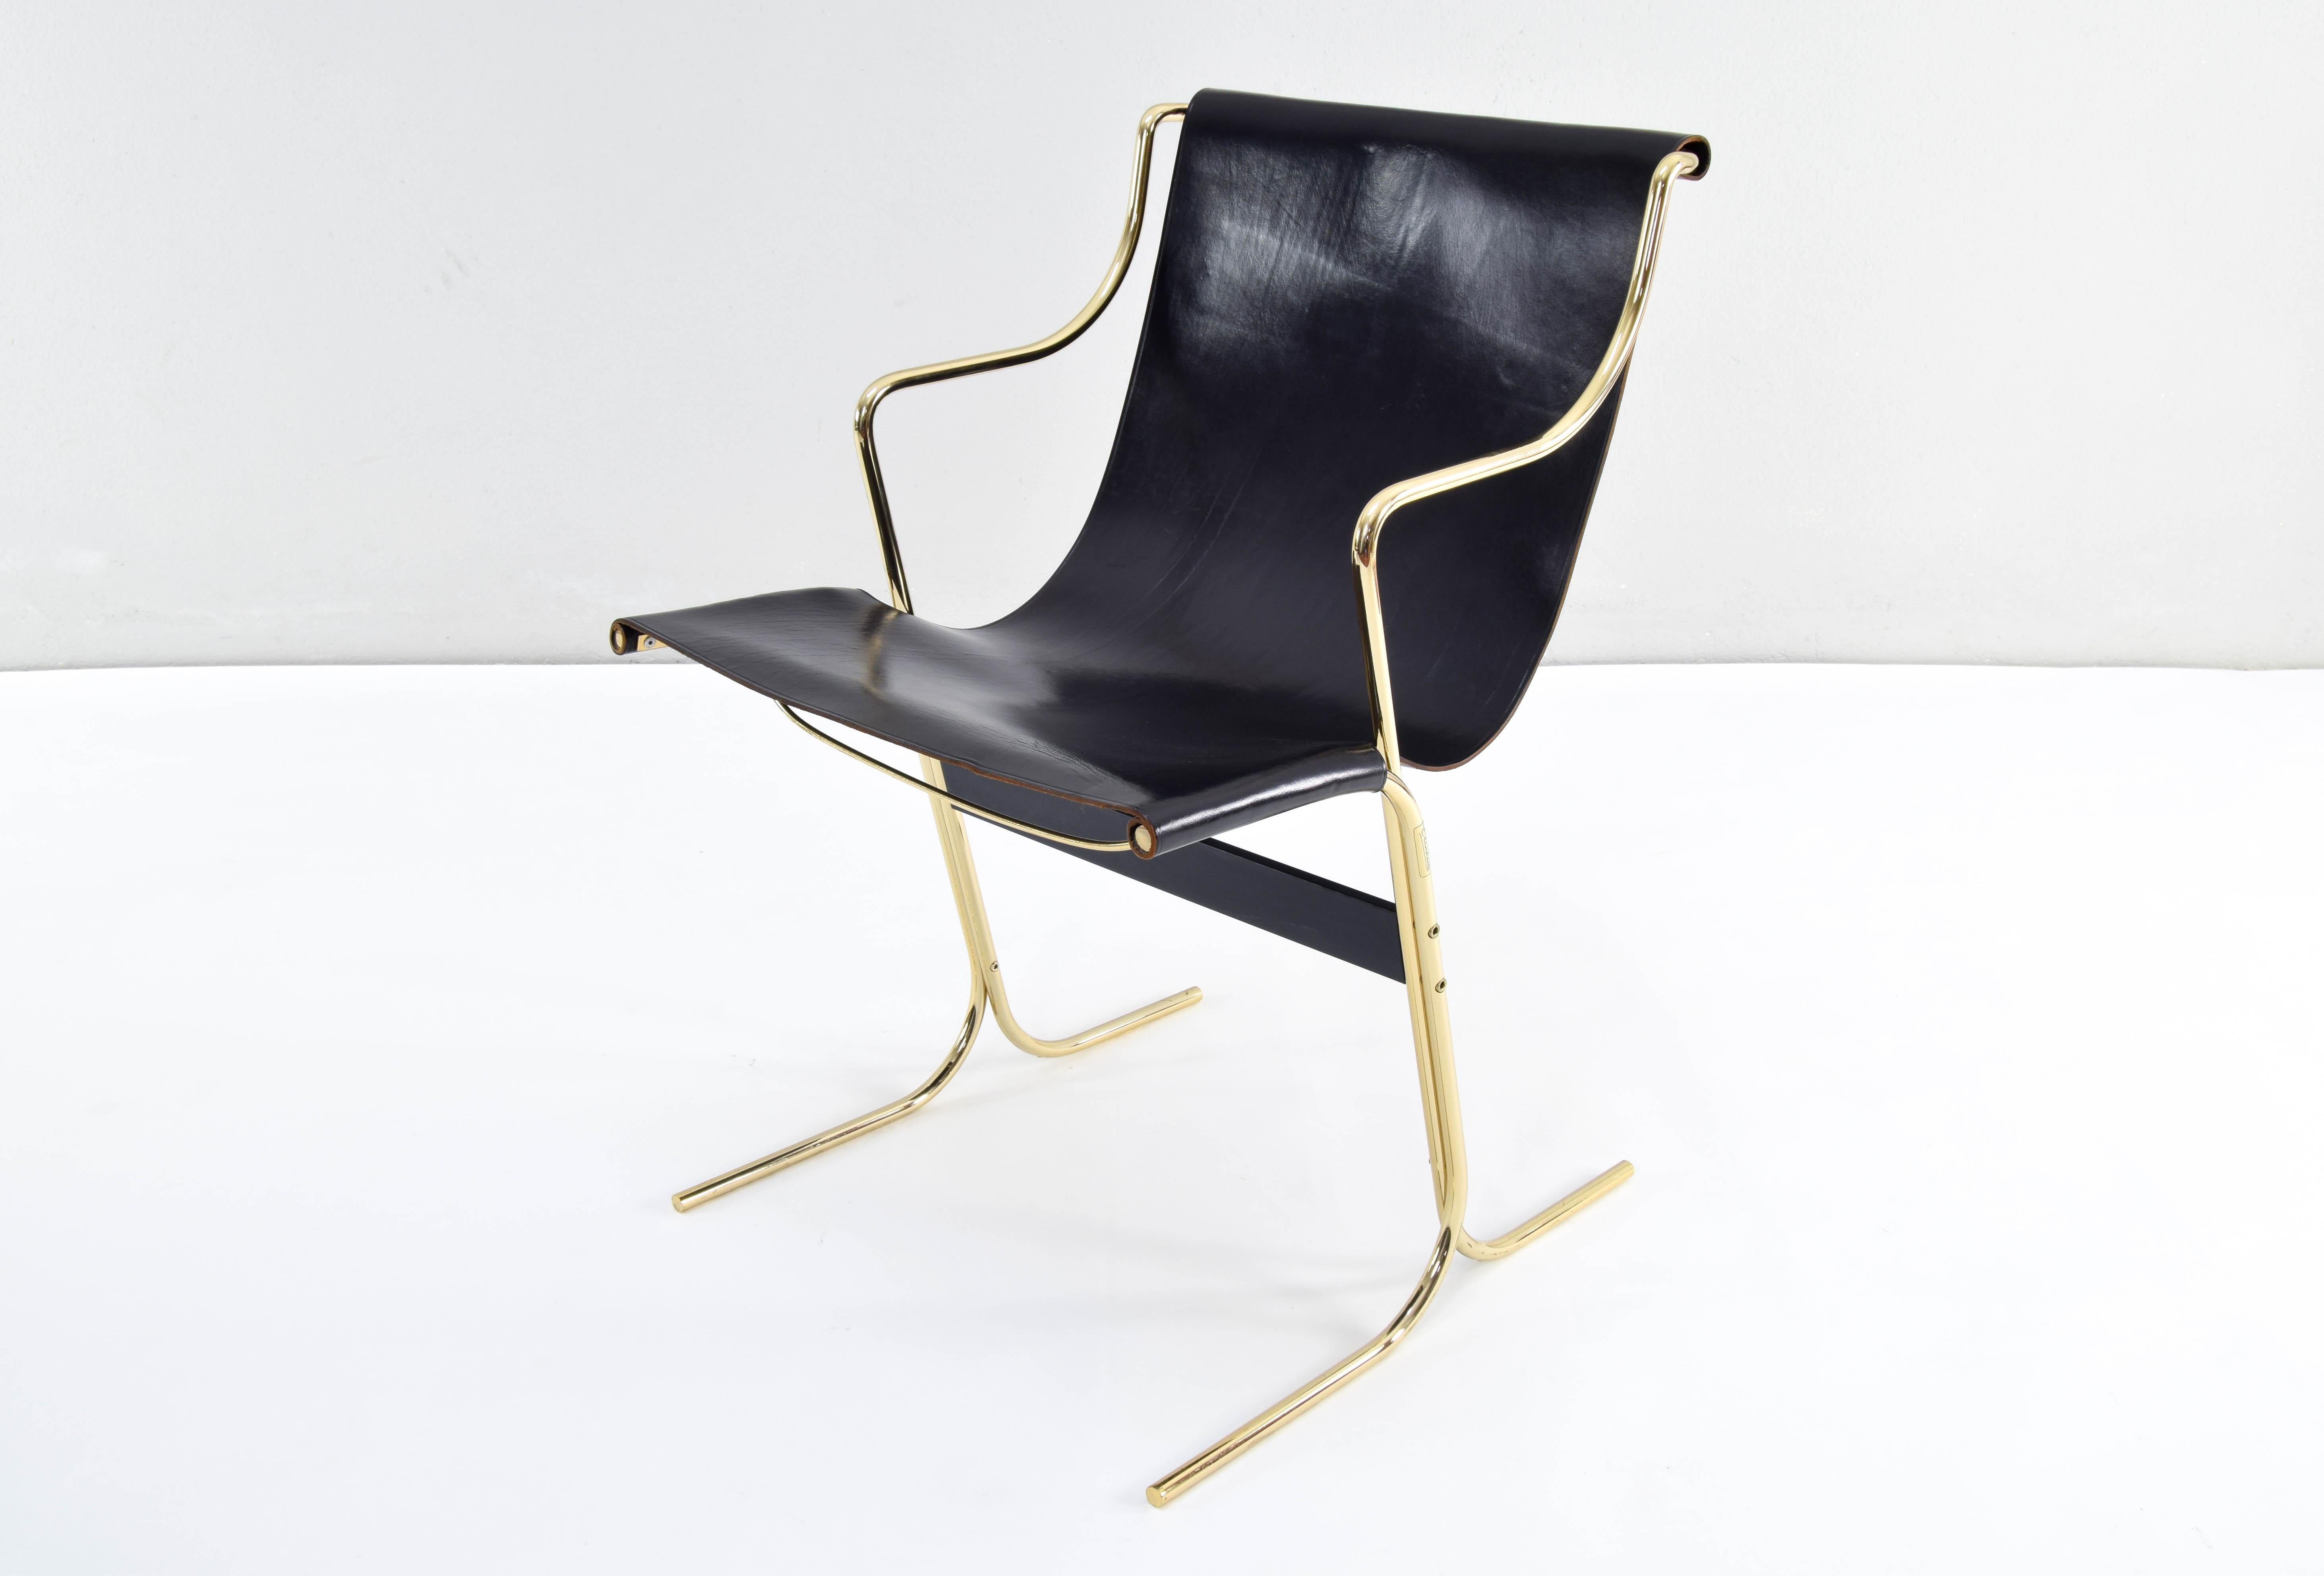 20th Century Pair of Leather and Brass Cigno Chairs by Ross Littell and Kelly to Padova Italy